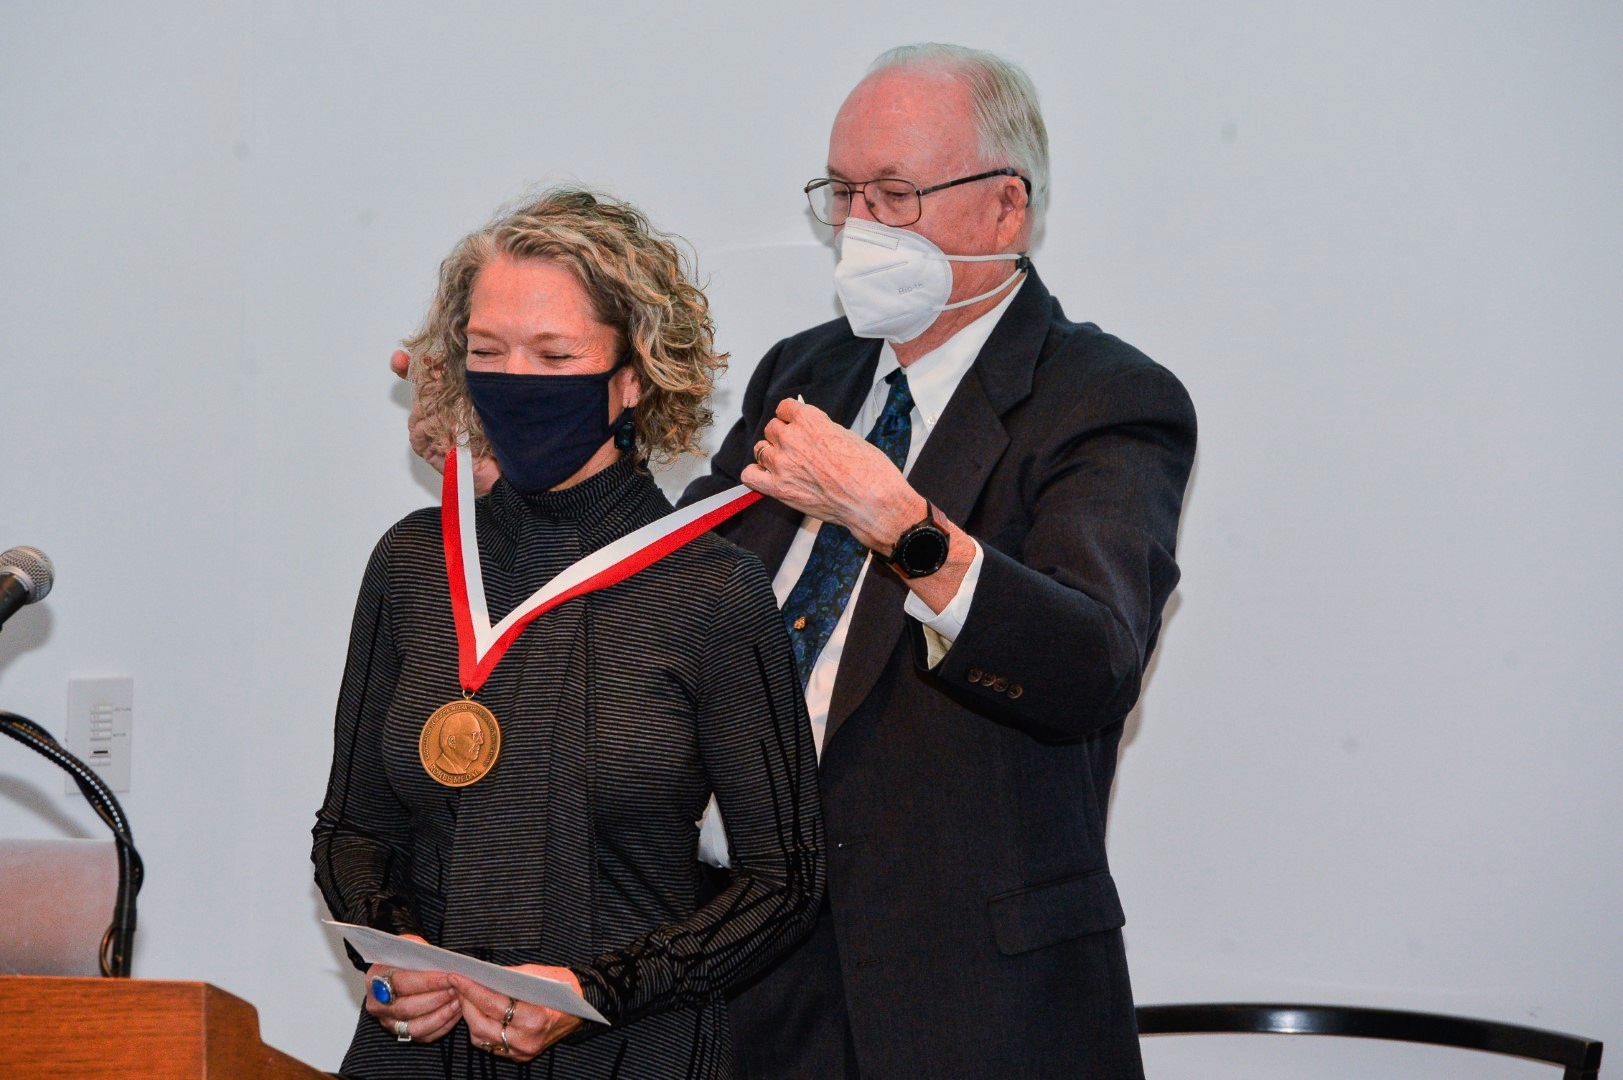 F. James Rohlf presents the Rohlf Medal to Joan T. Richtsmeier